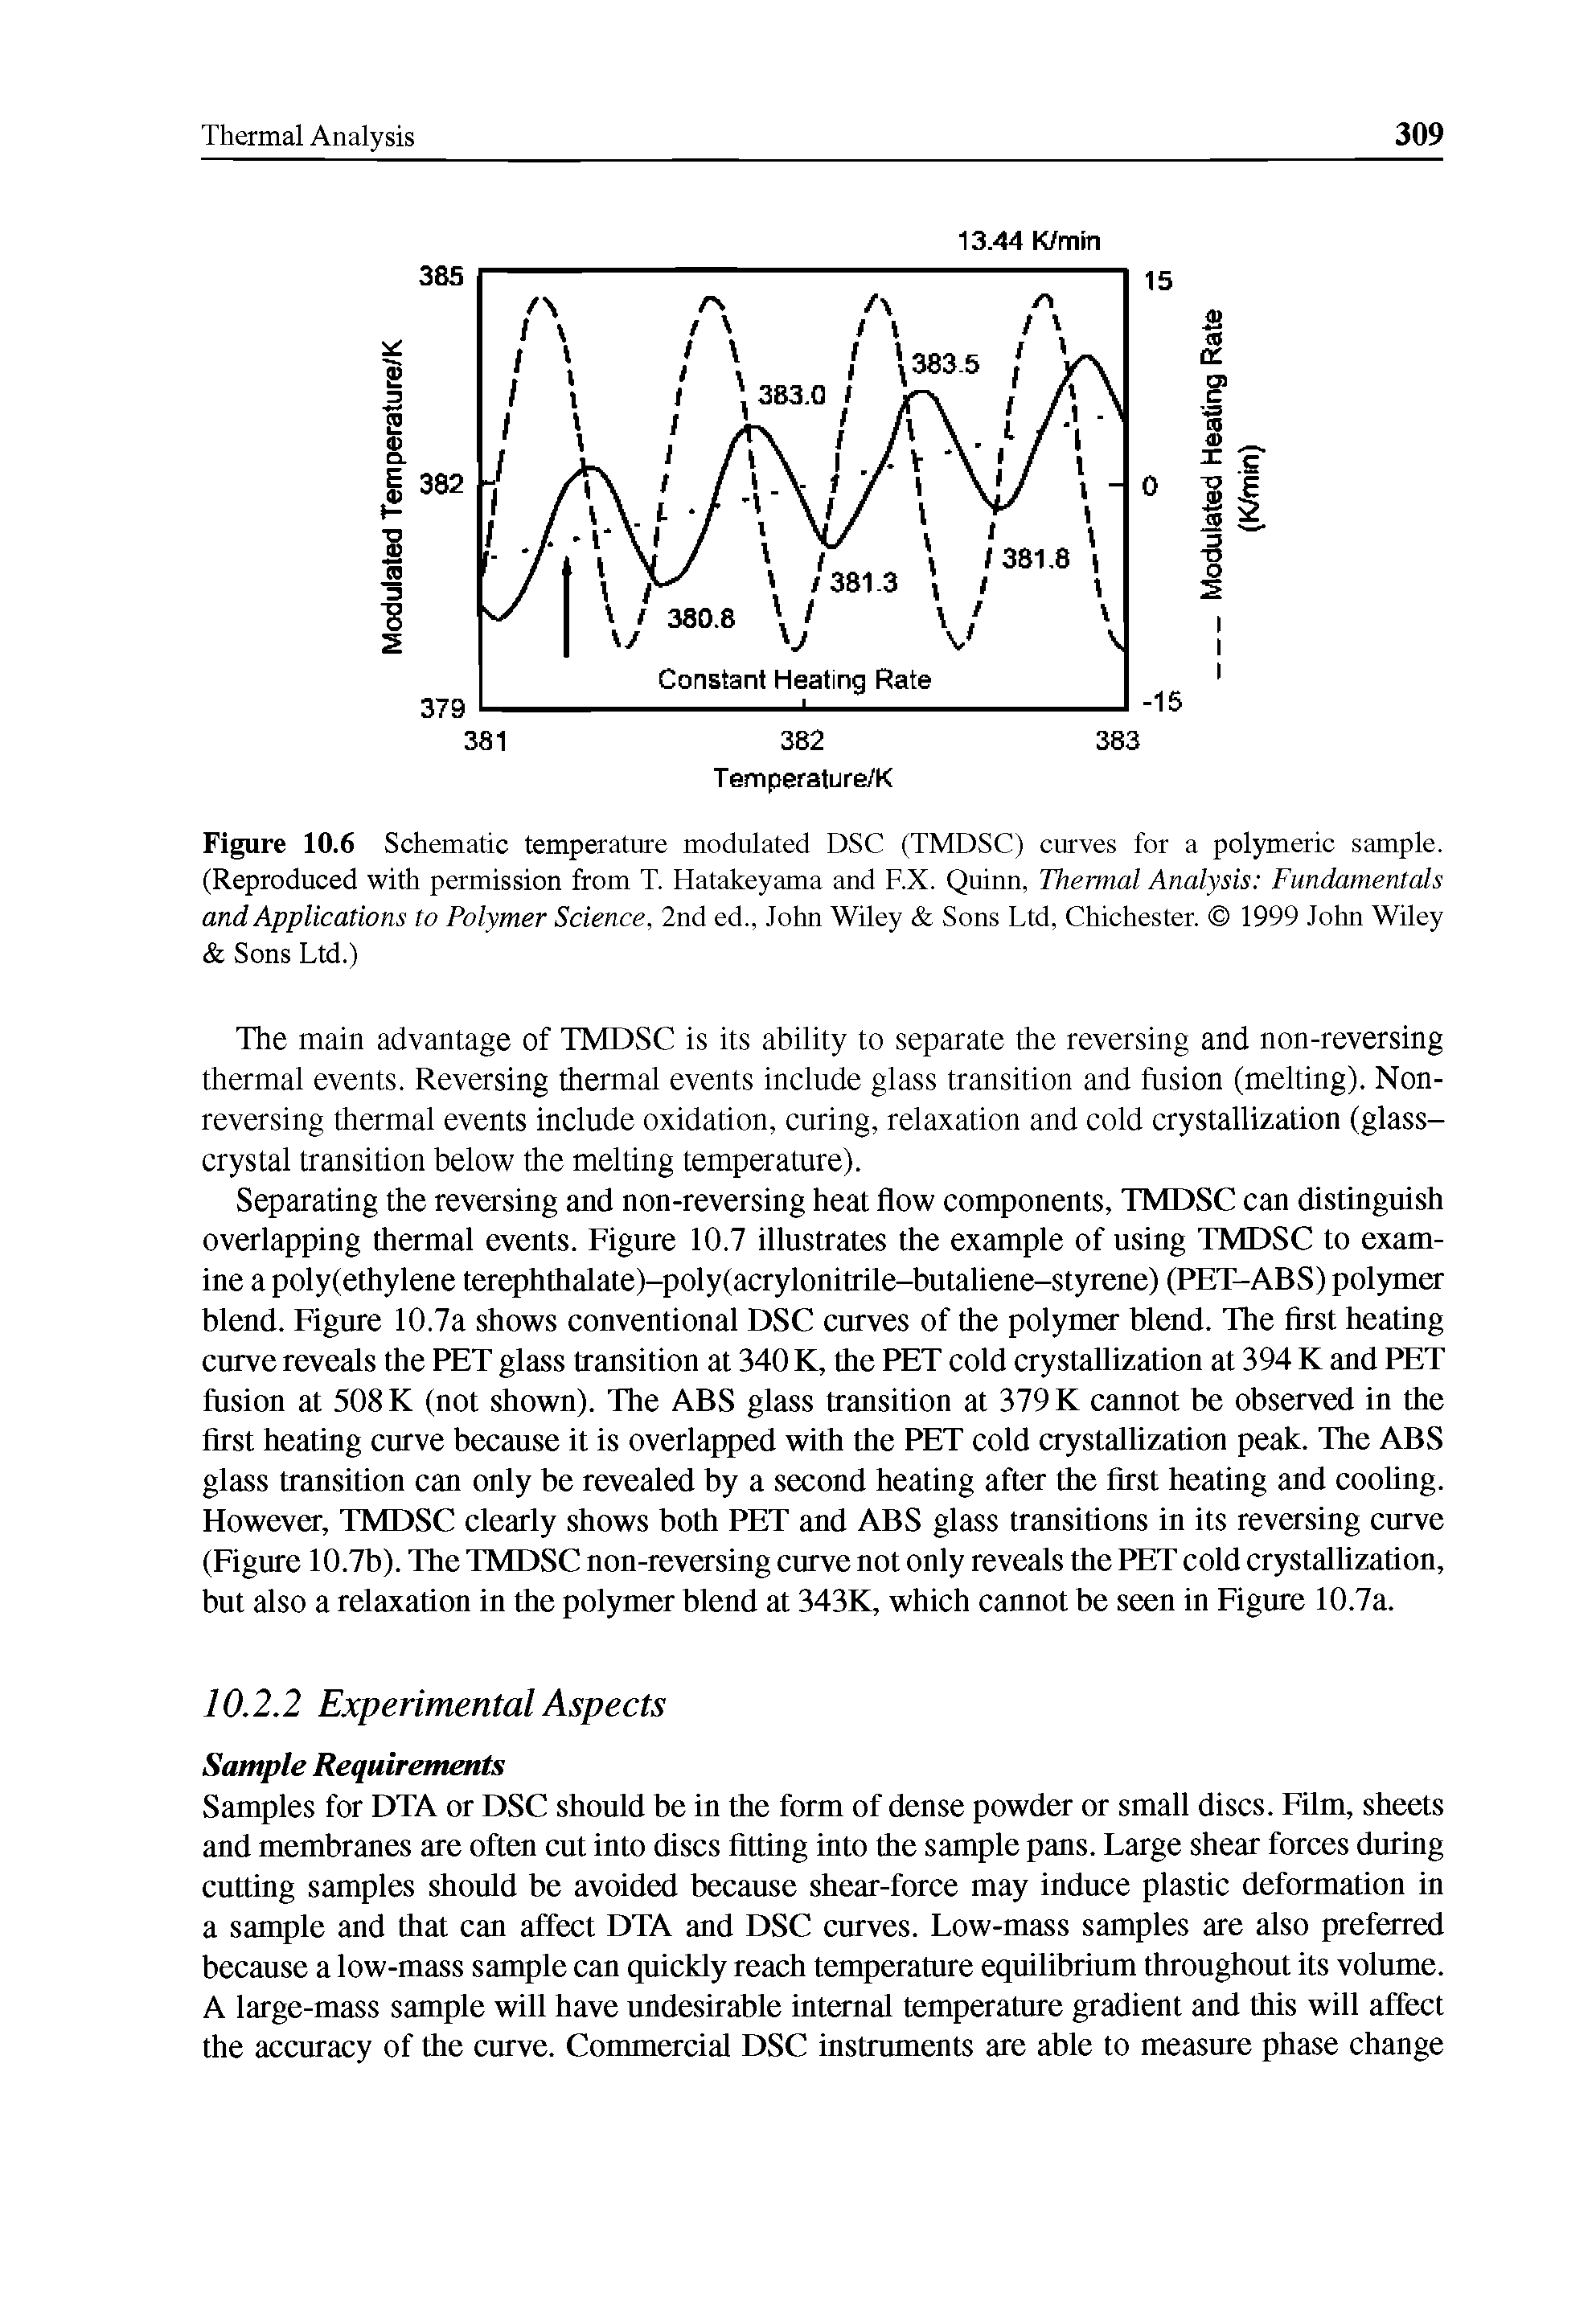 Figure 10.6 Schematic temperature modulated DSC (TMDSC) curves for a polymeric sample. (Reproduced with permission from T. Hatakeyama and F.X. Quinn, Thermal Analysis Fundamentals and Applications to Polymer Science, 2nd ed., John Wiley Sons Ltd, Chichester. 1999 John Wiley Sons Ltd.)...